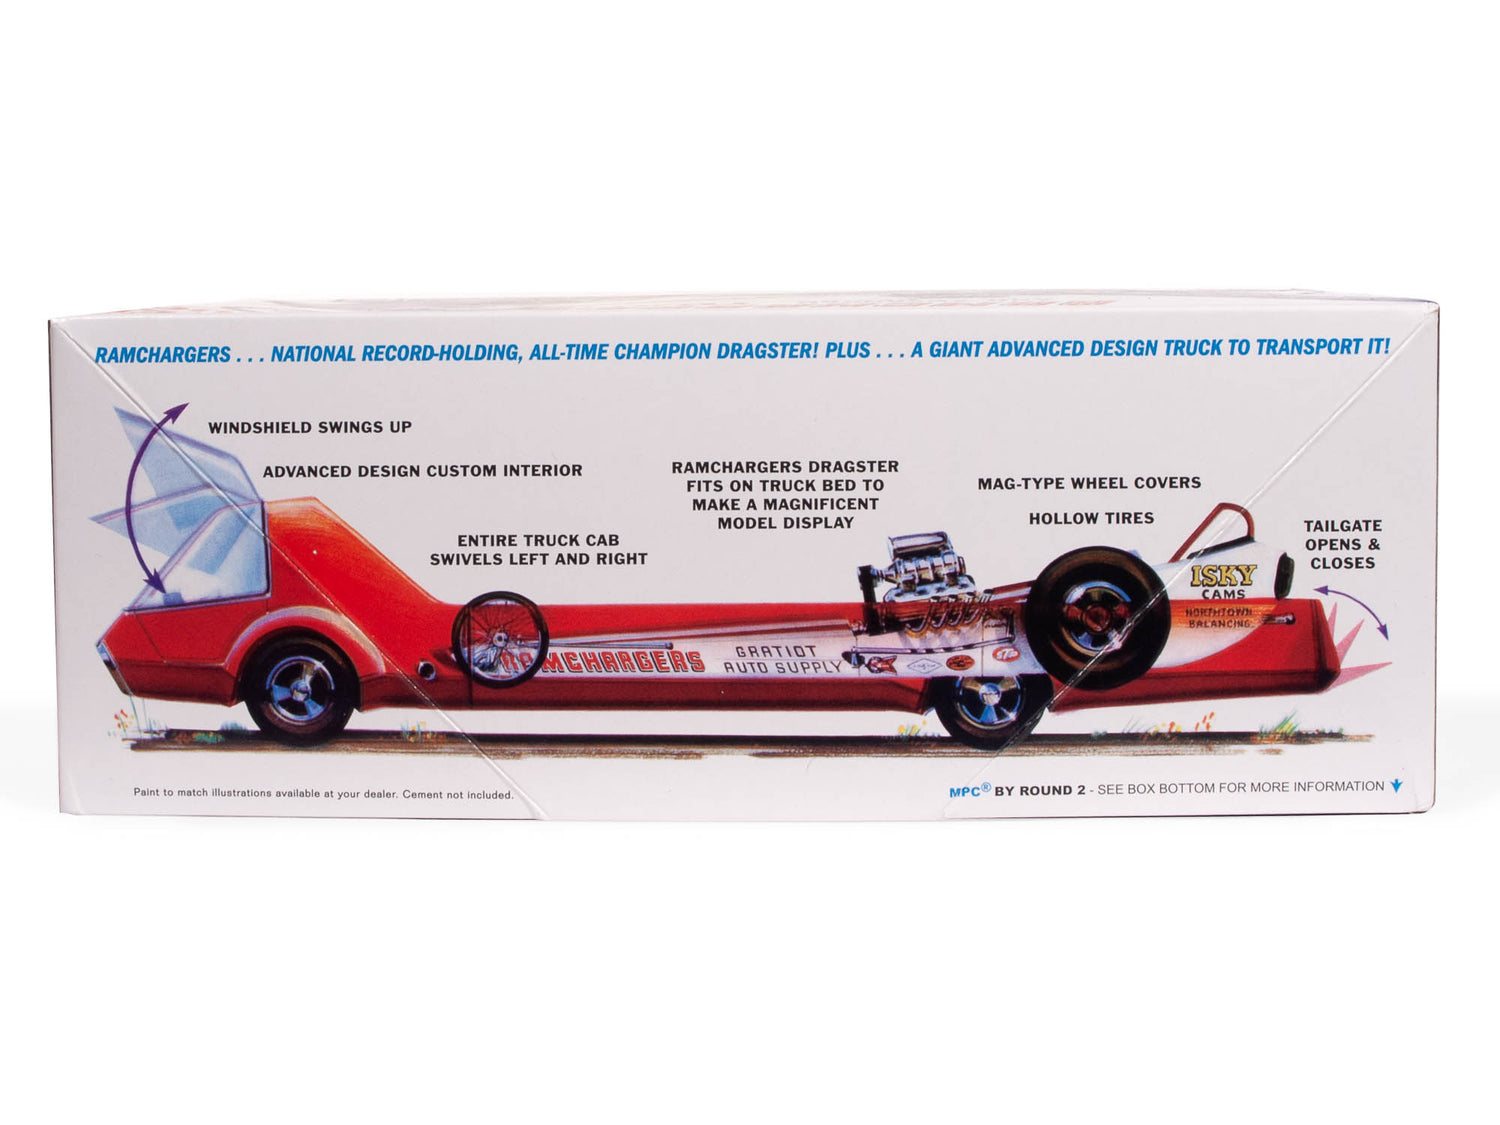 Ramchargers Dragster with Transport Truck features